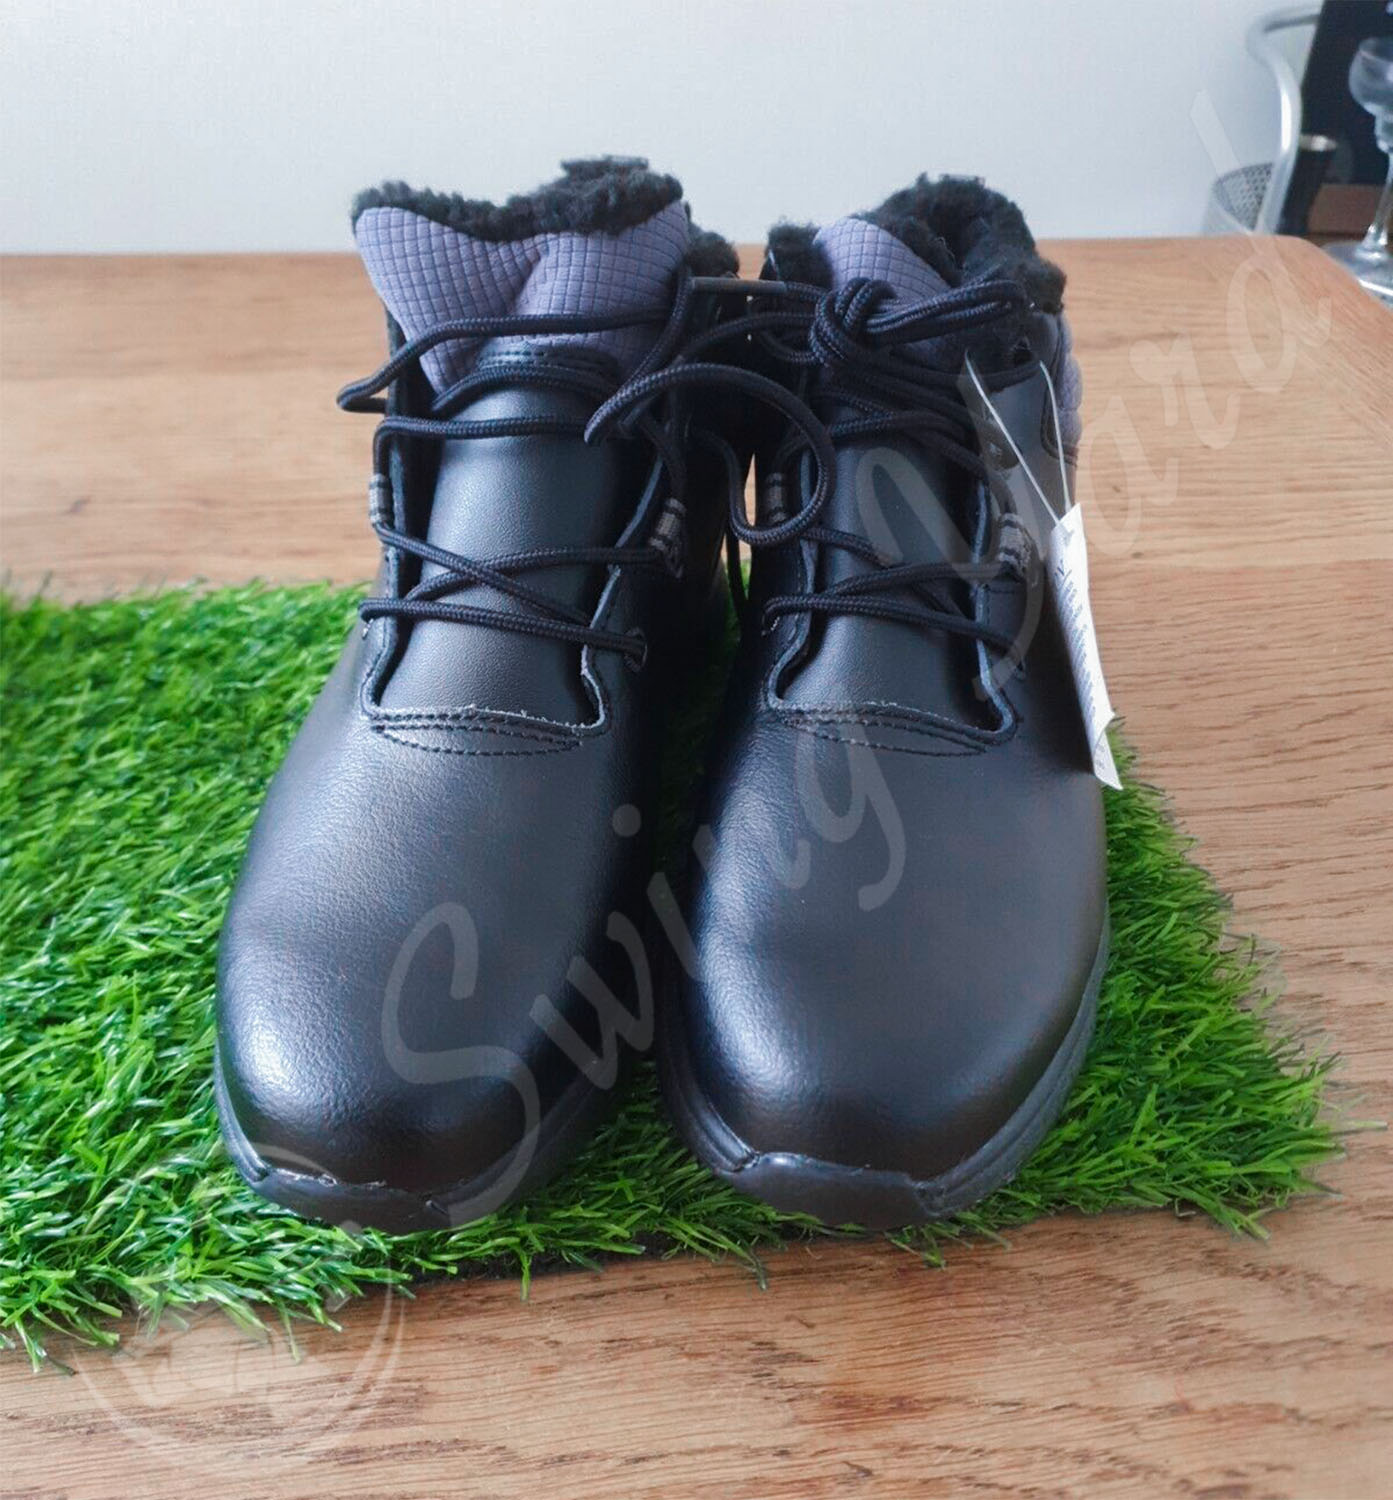 A front side view of FootJoy women golf boots on the the artificial grass mat